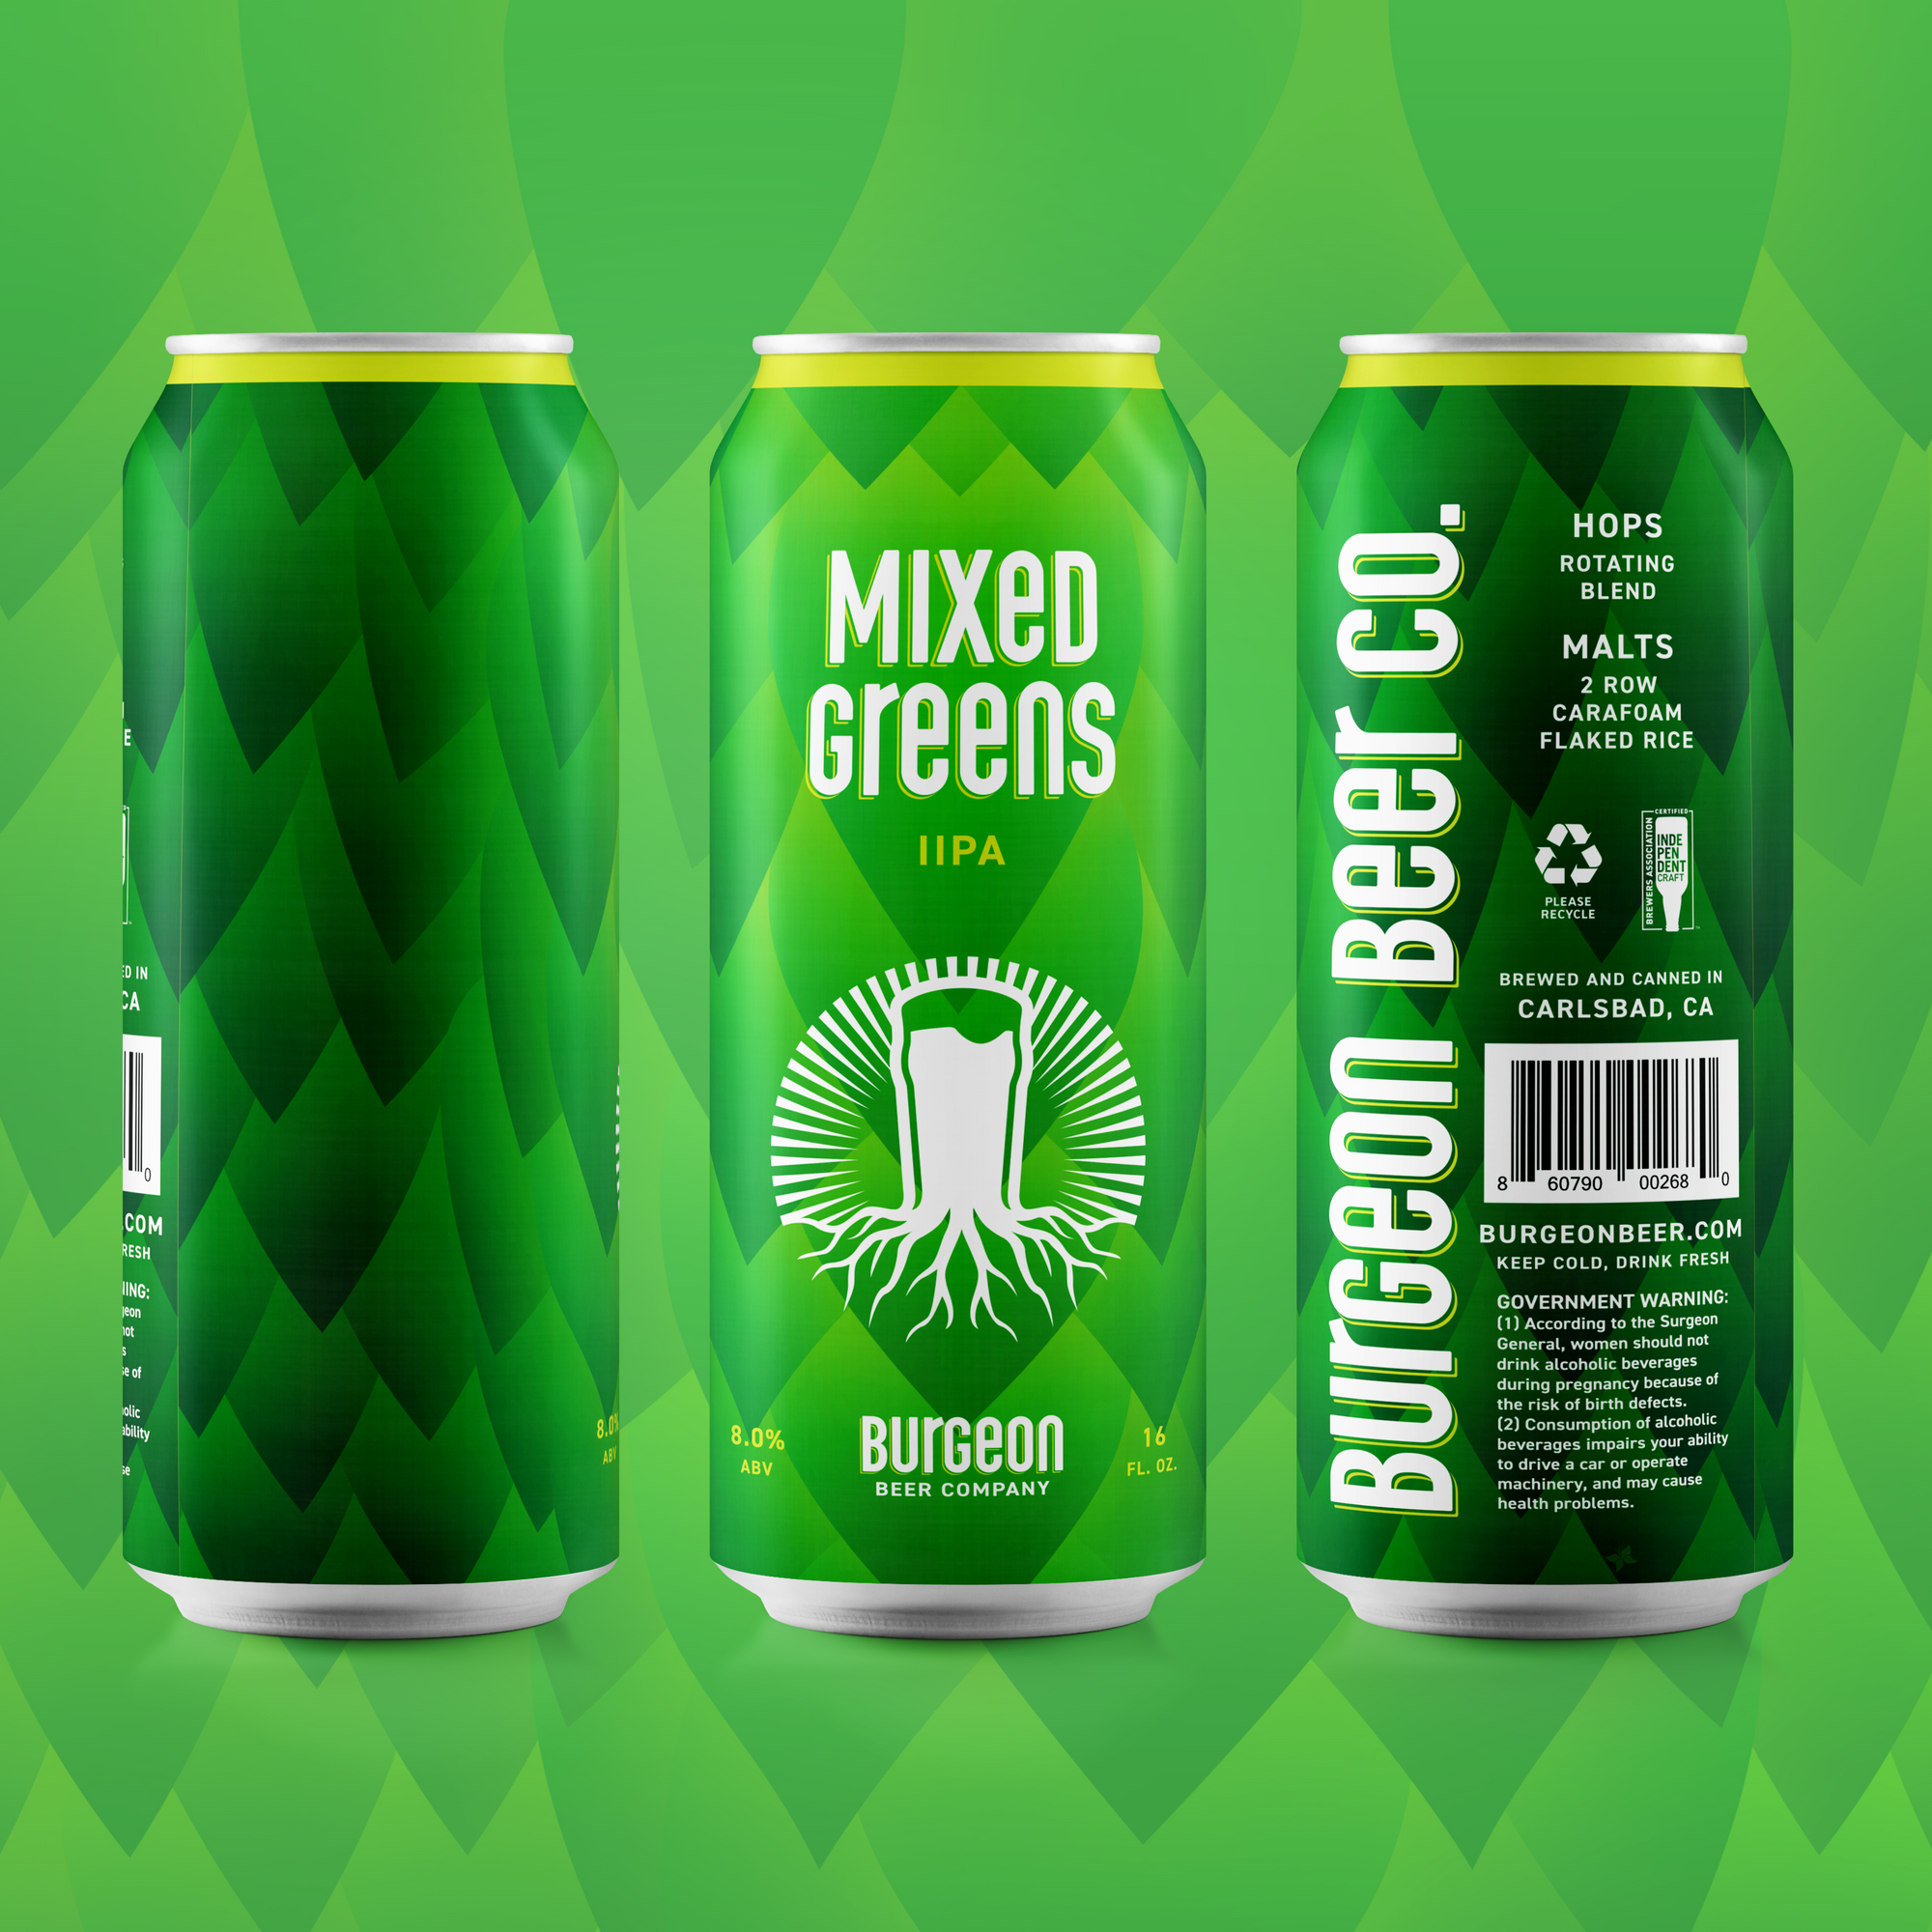 Can Release: Mixed Greens Double IPA